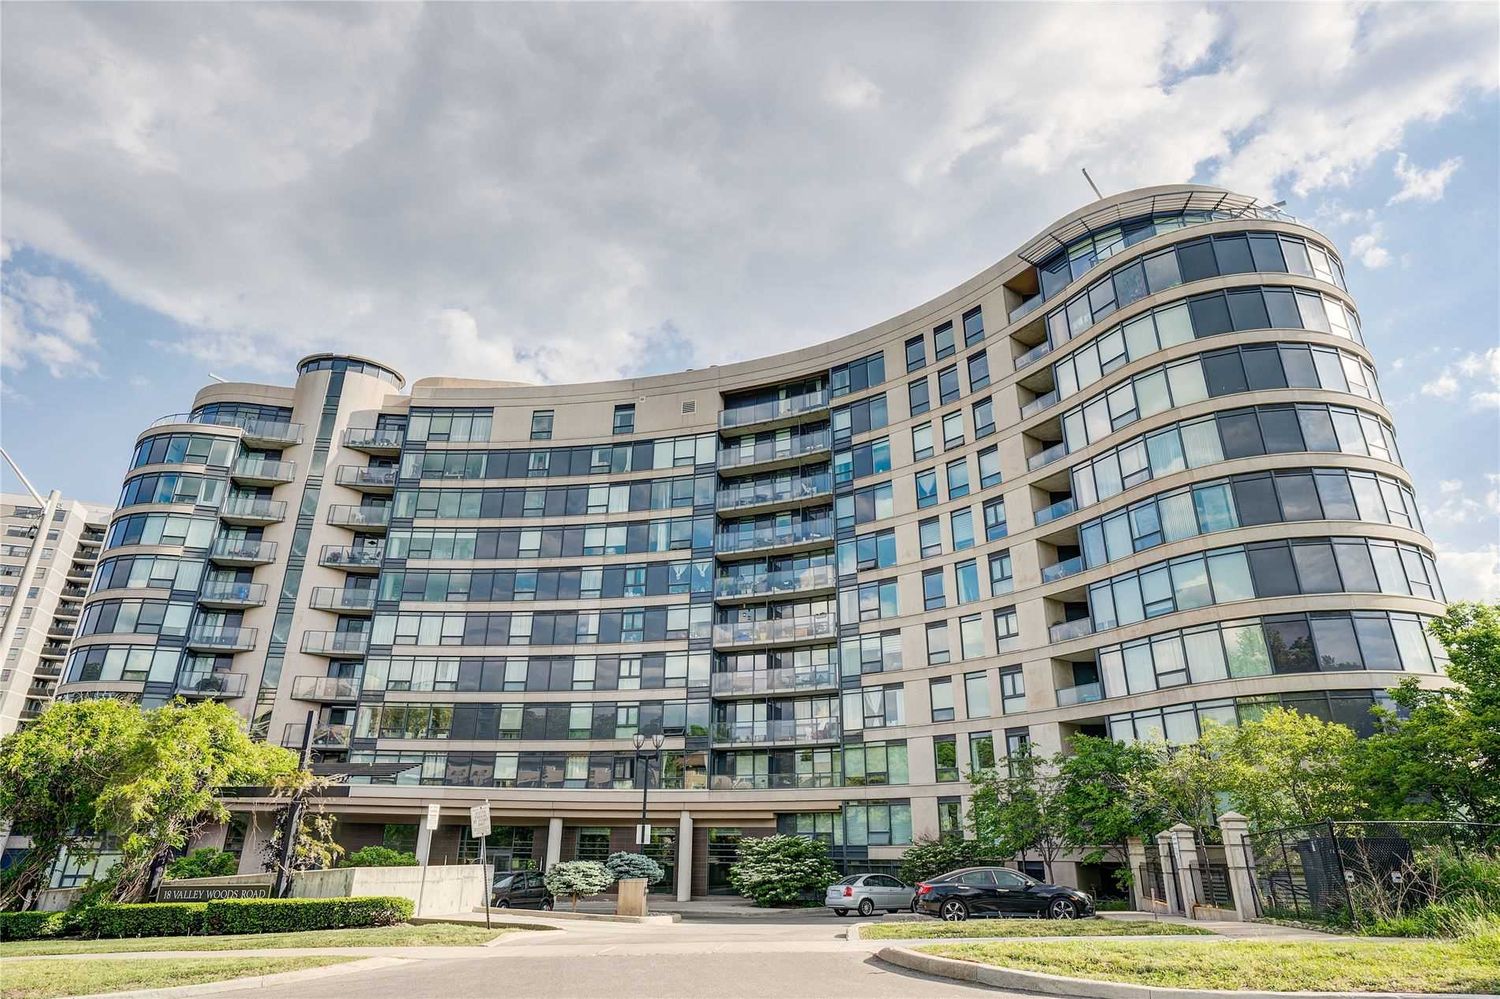 18 Valley Woods Road. Bellair Gardens Condos is located in  North York, Toronto - image #1 of 3